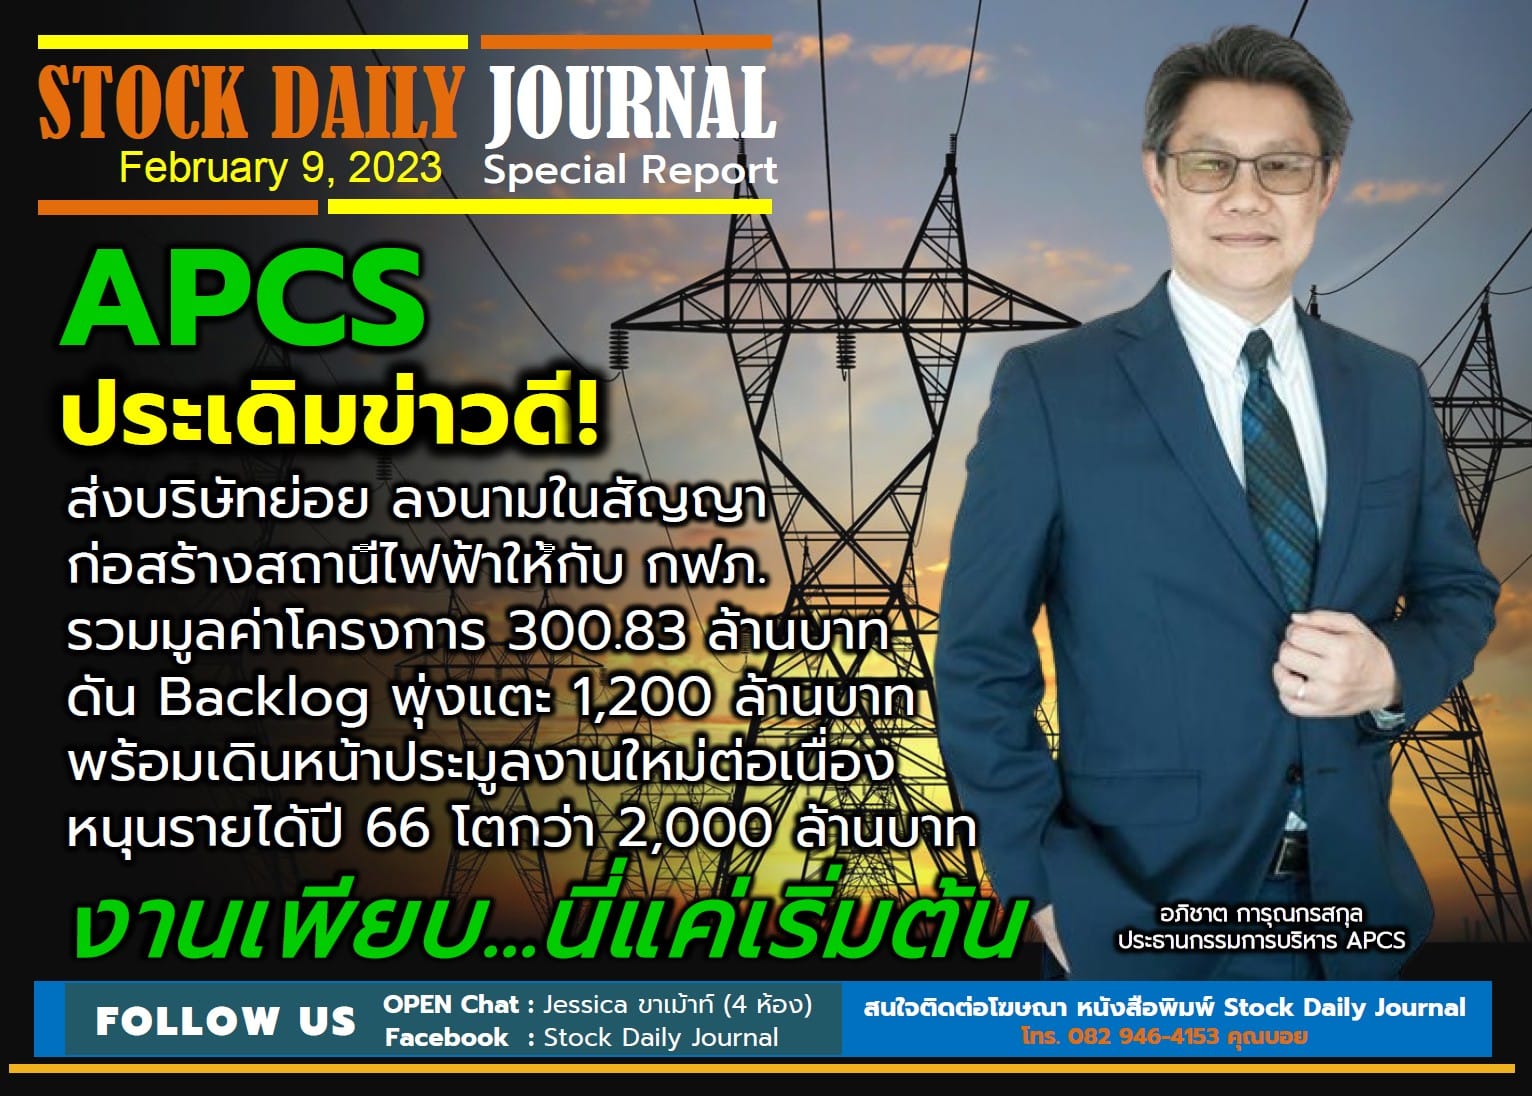 STOCK DAILY JOURNAL “Special Report : APCS”